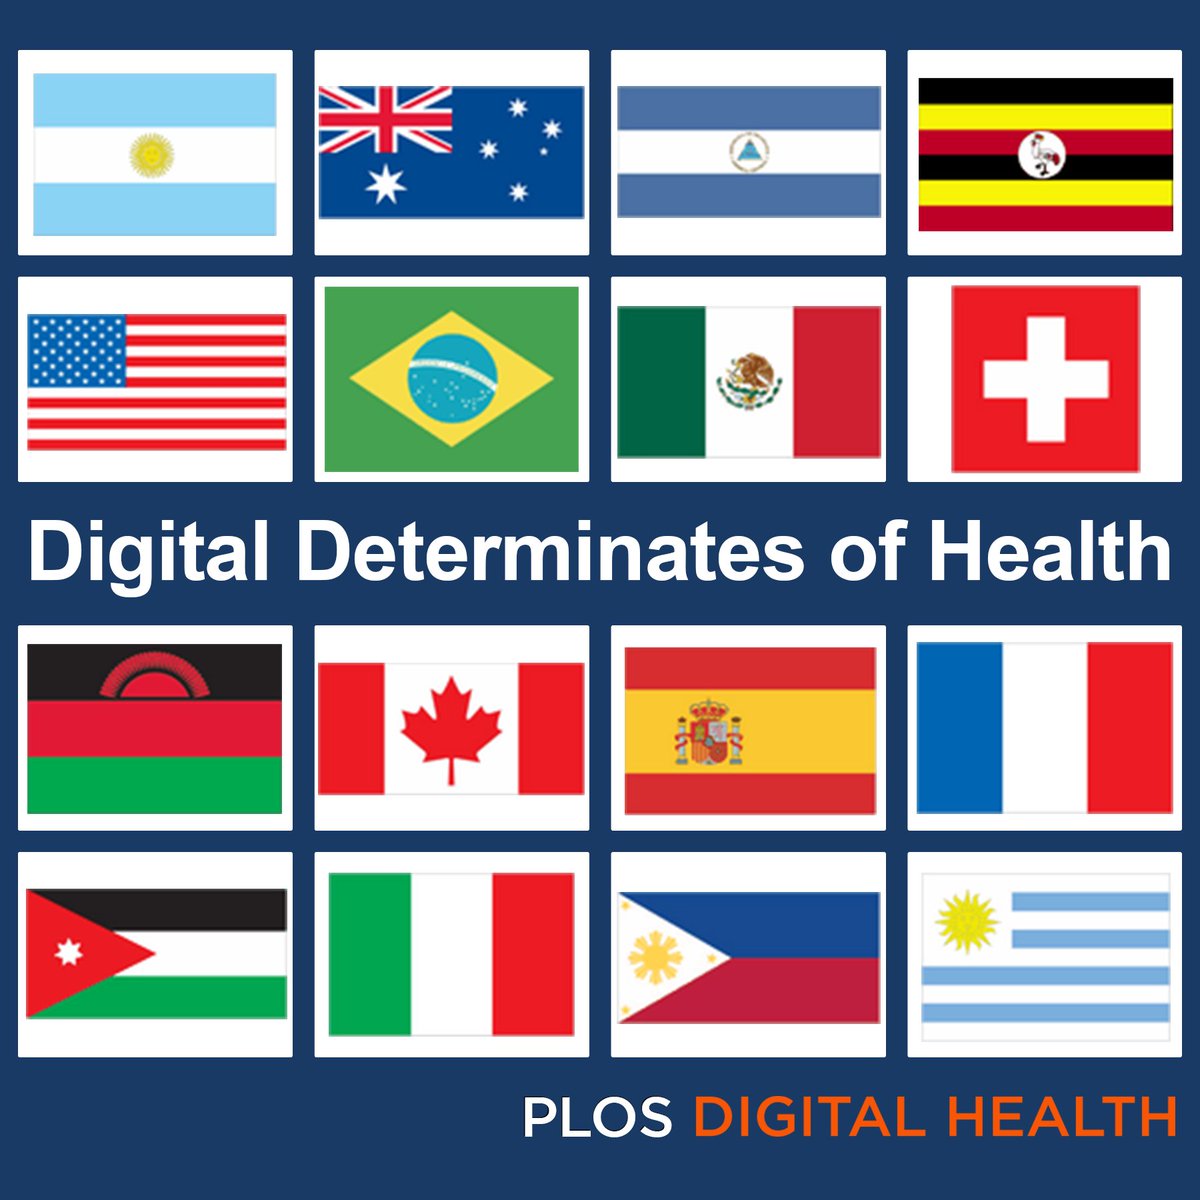 One of our exciting milestones this year was launching our first collection, 'Digital Determinants of Health'! Check out articles from the collection here: plos.io/3Sv2kRw